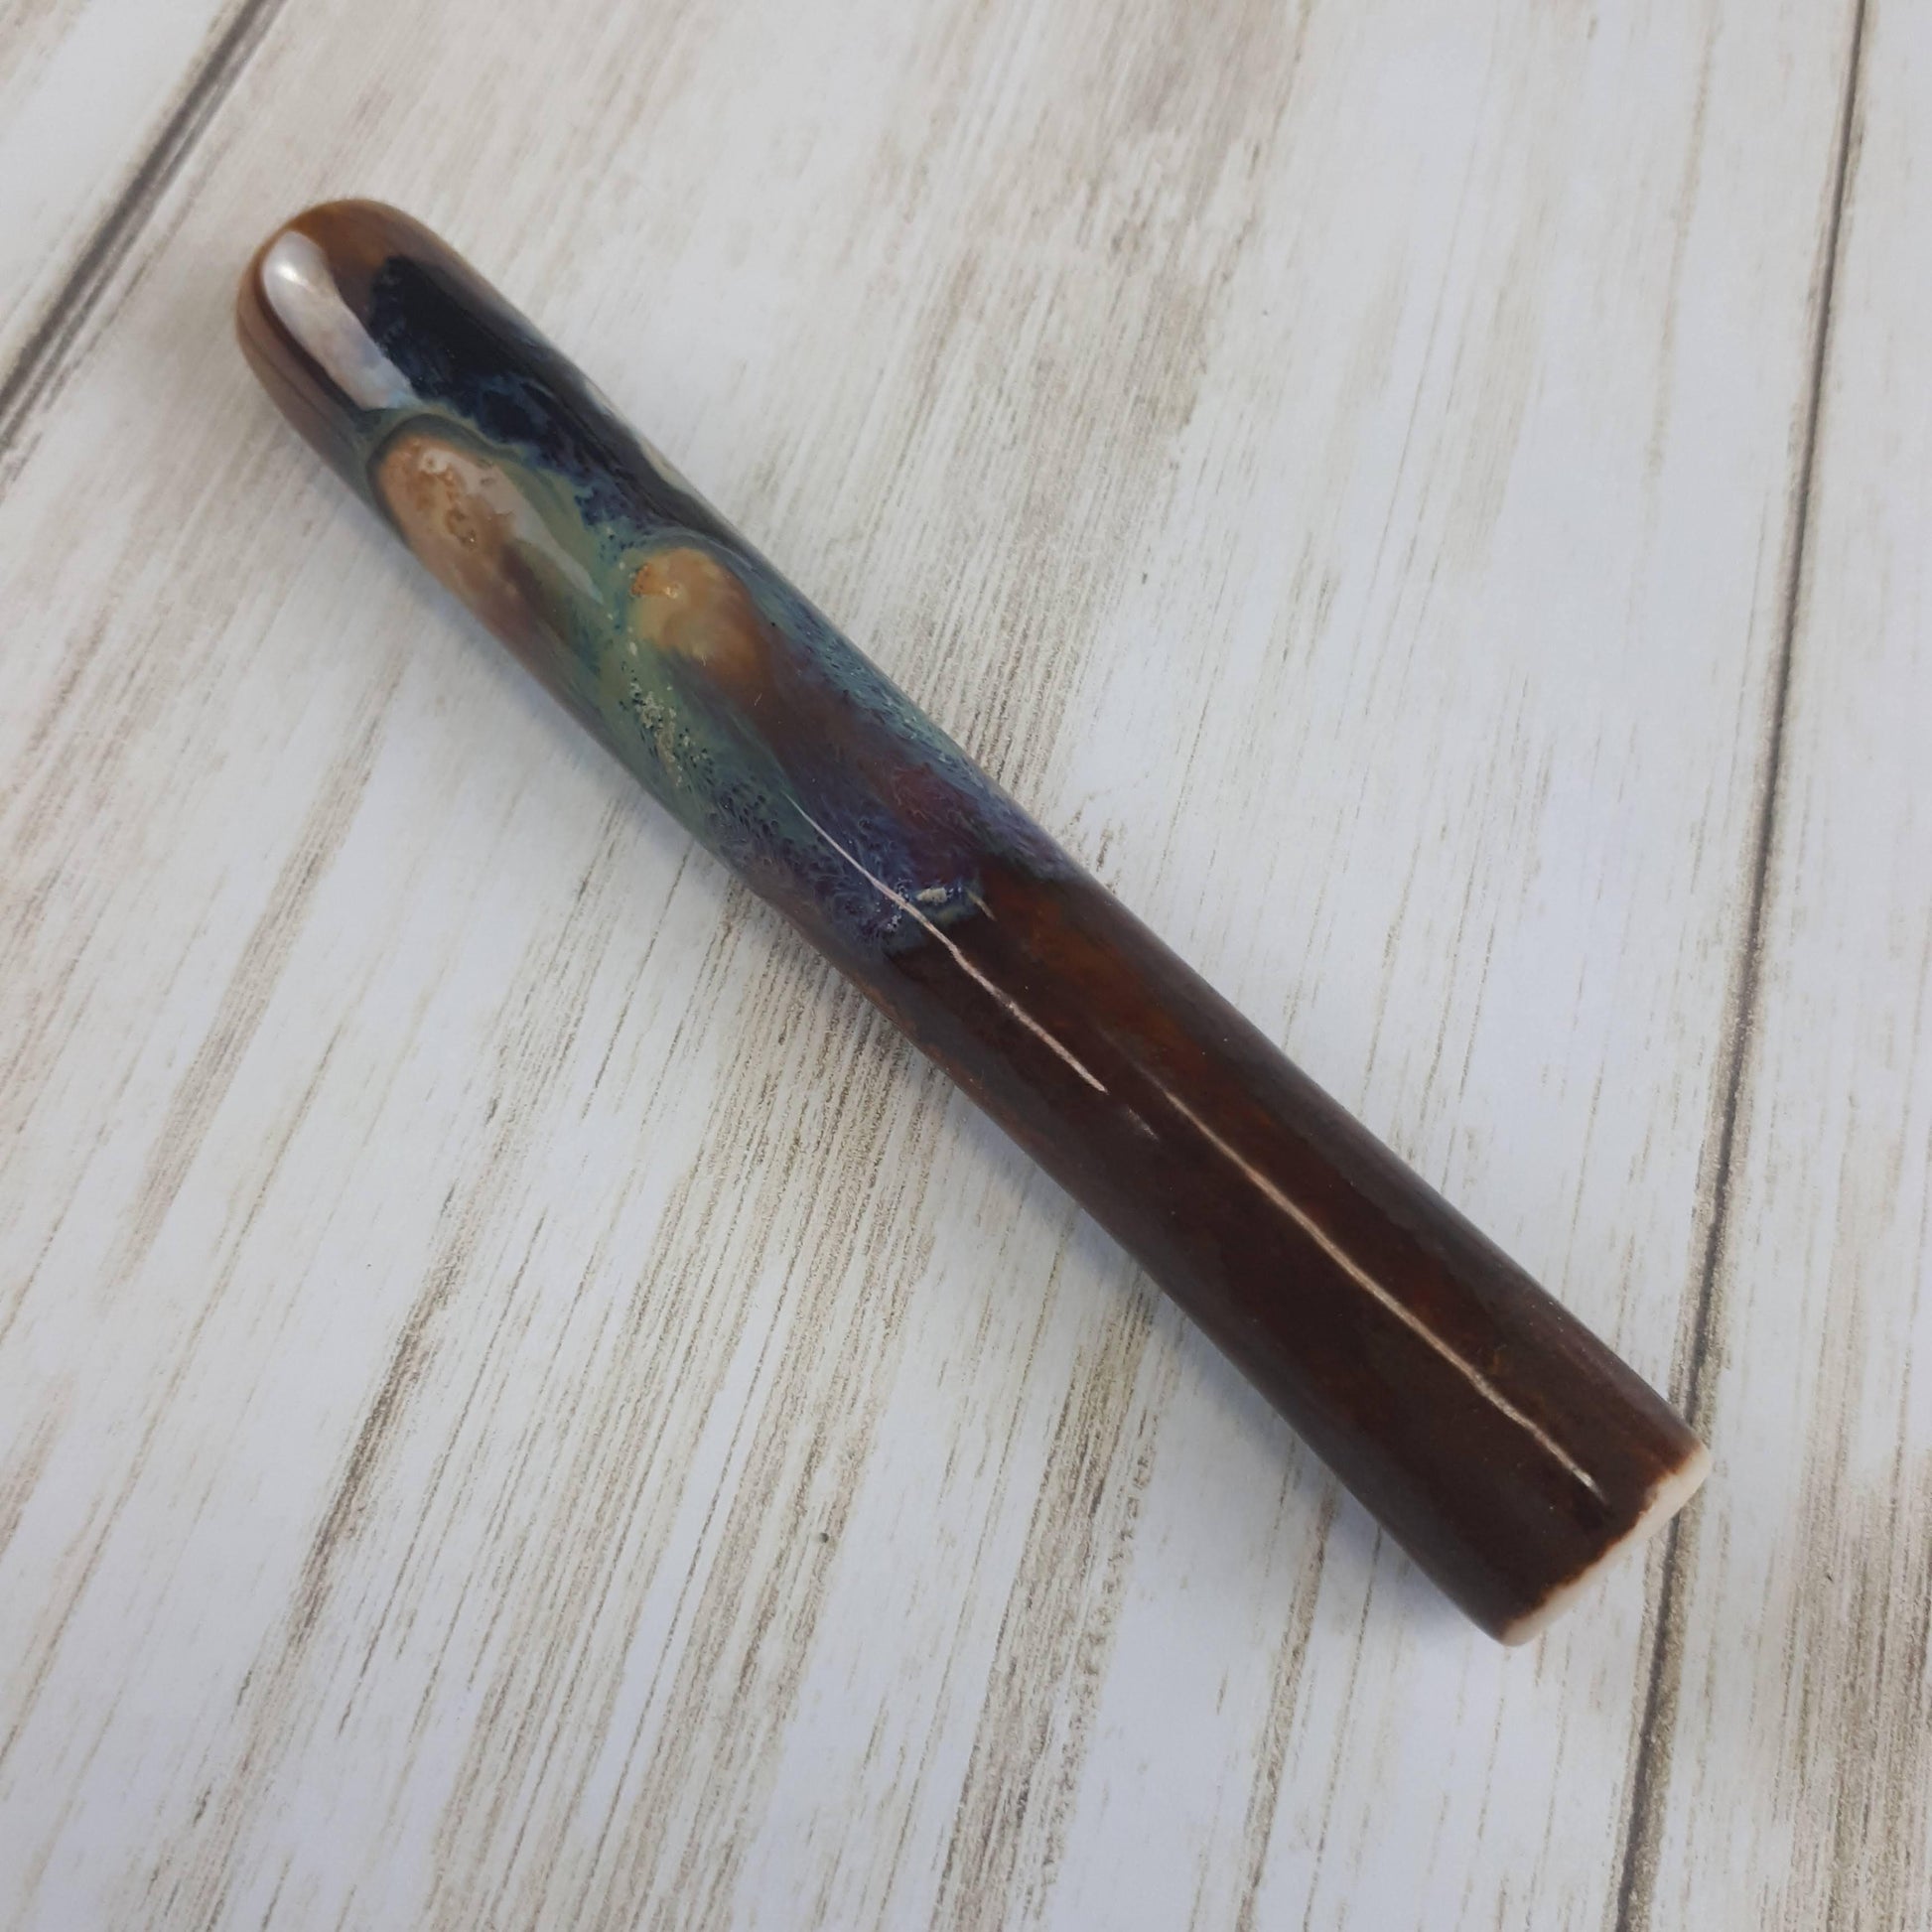 Dirty Peacock uno chillum pipe side view. brown, with blue/green drips and white bursts